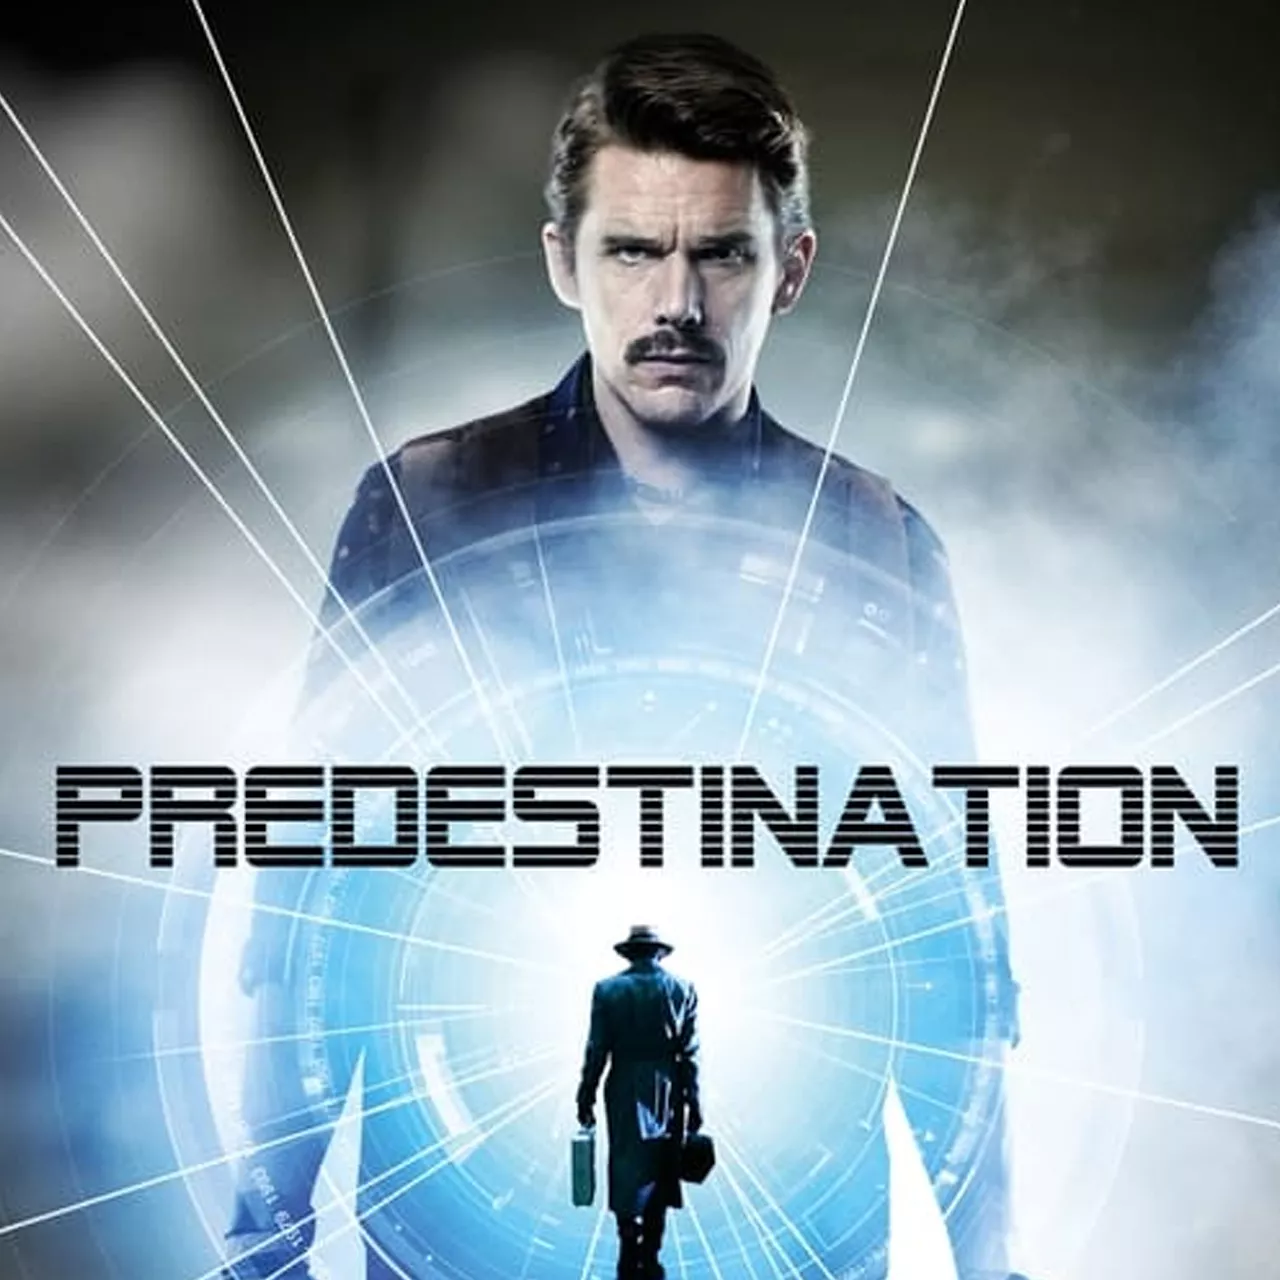 Predestination Movie Review And Analysis In Telugu